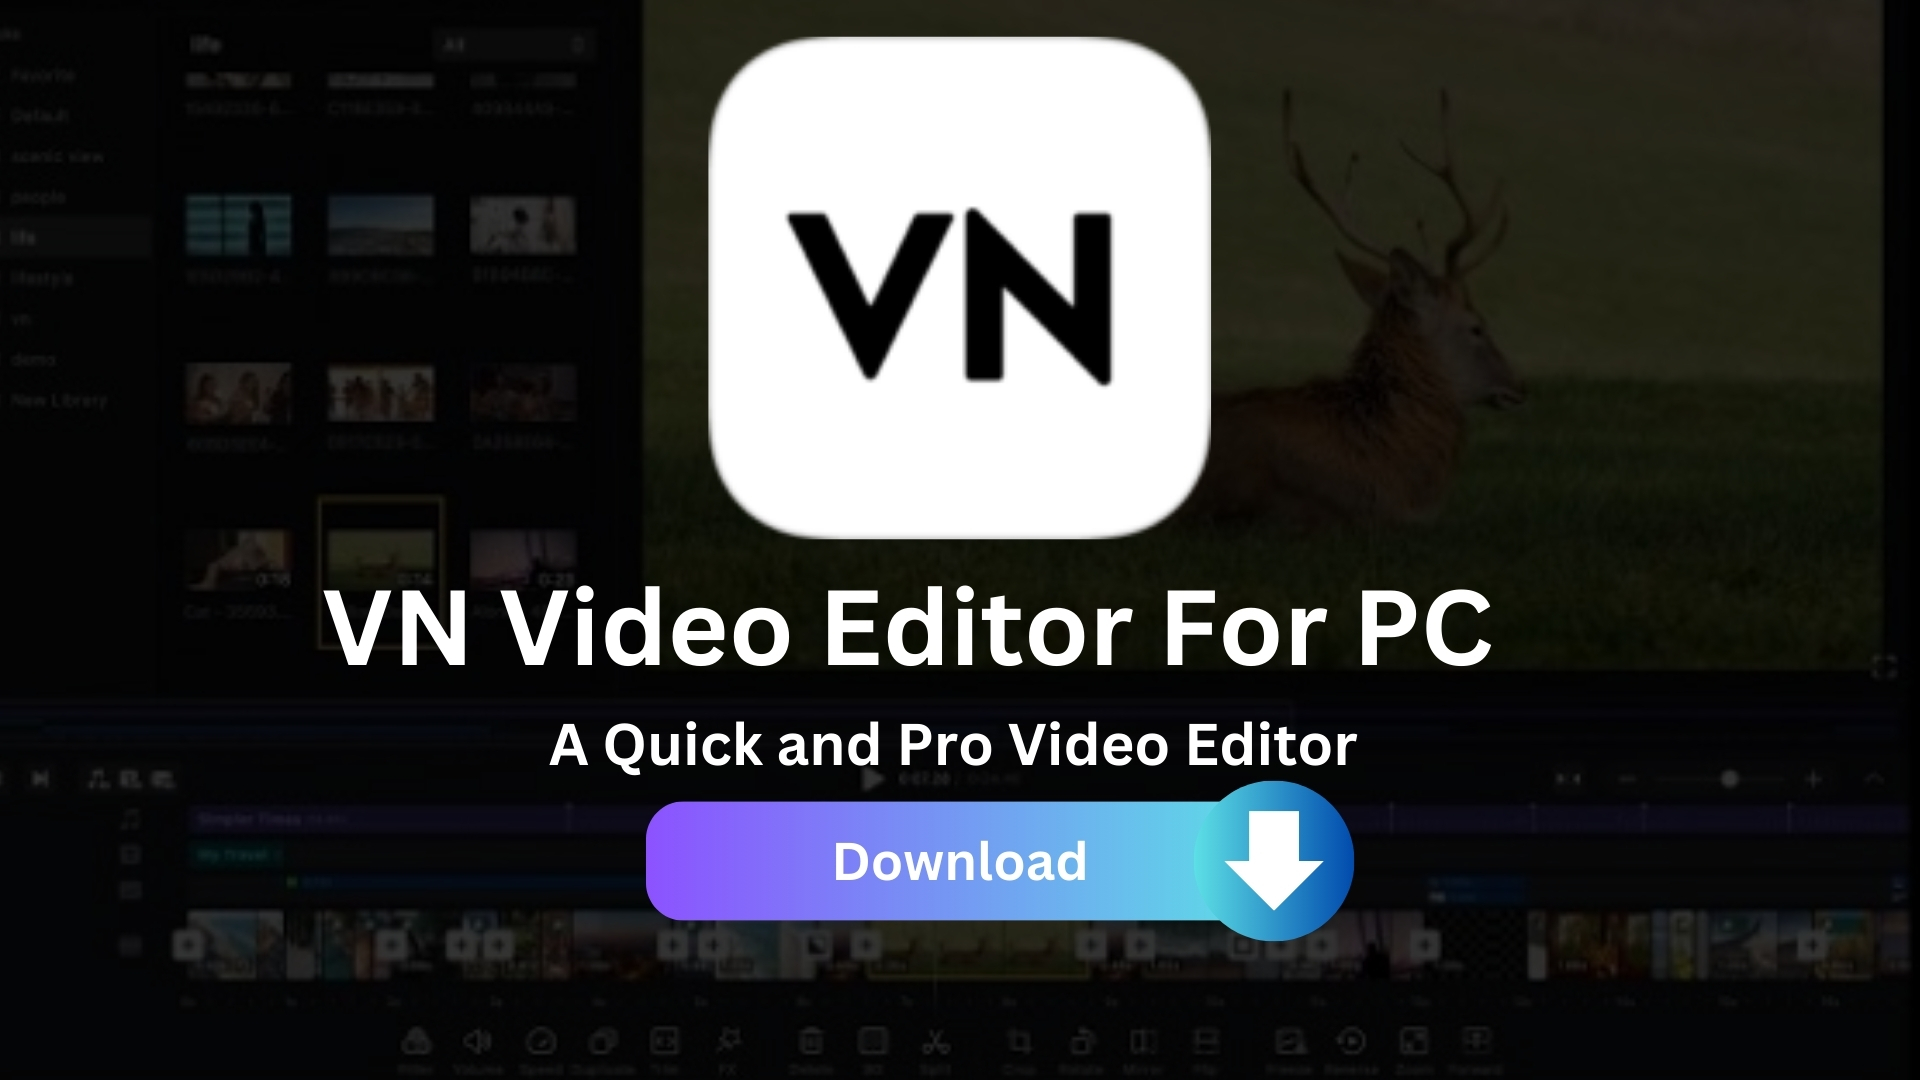 vn video editor for pc